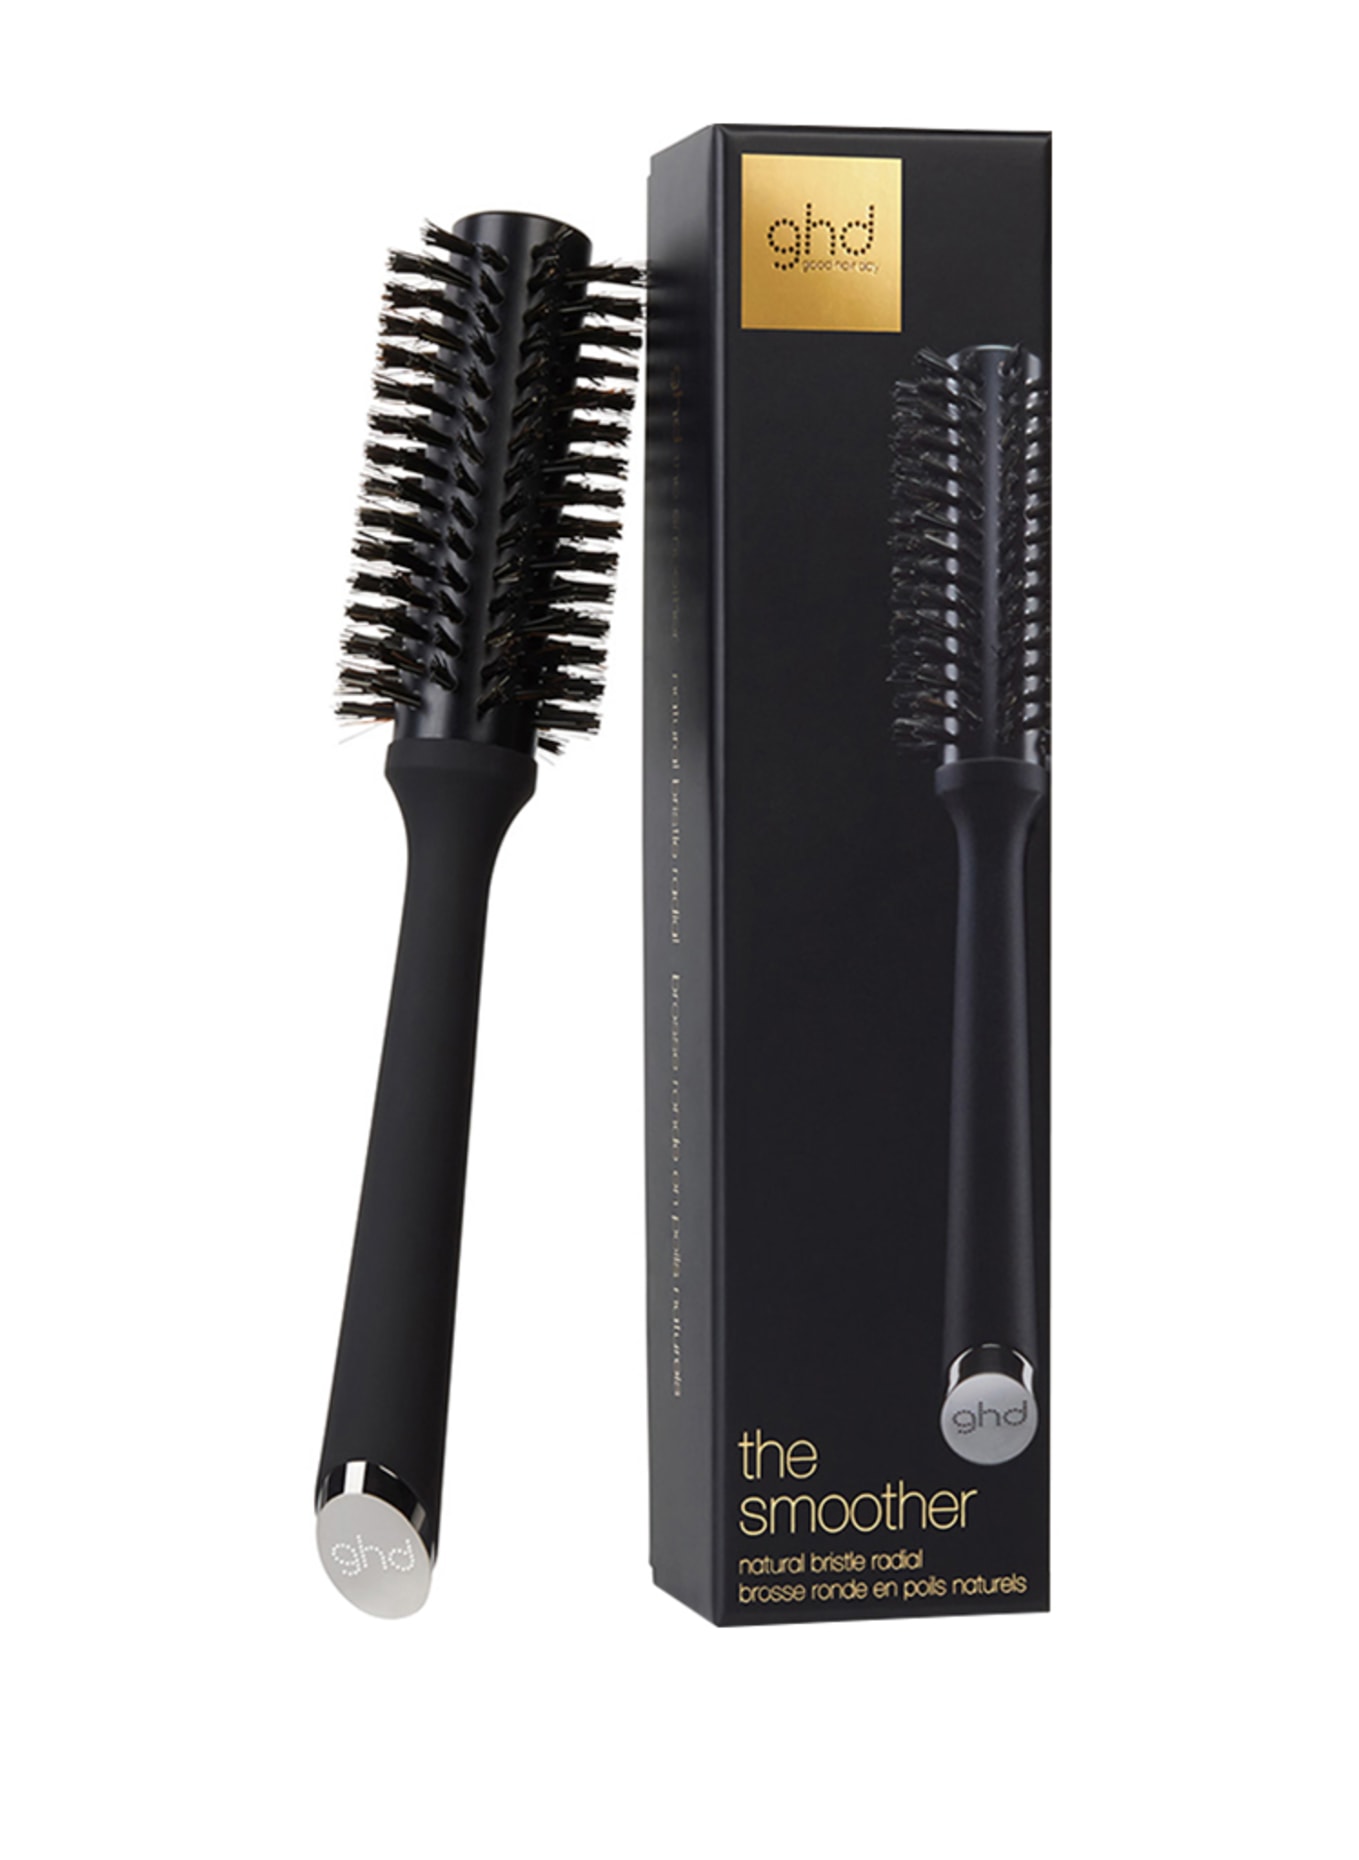 ghd THE SMOOTHER (SIZE 2) (Obrázek 2)